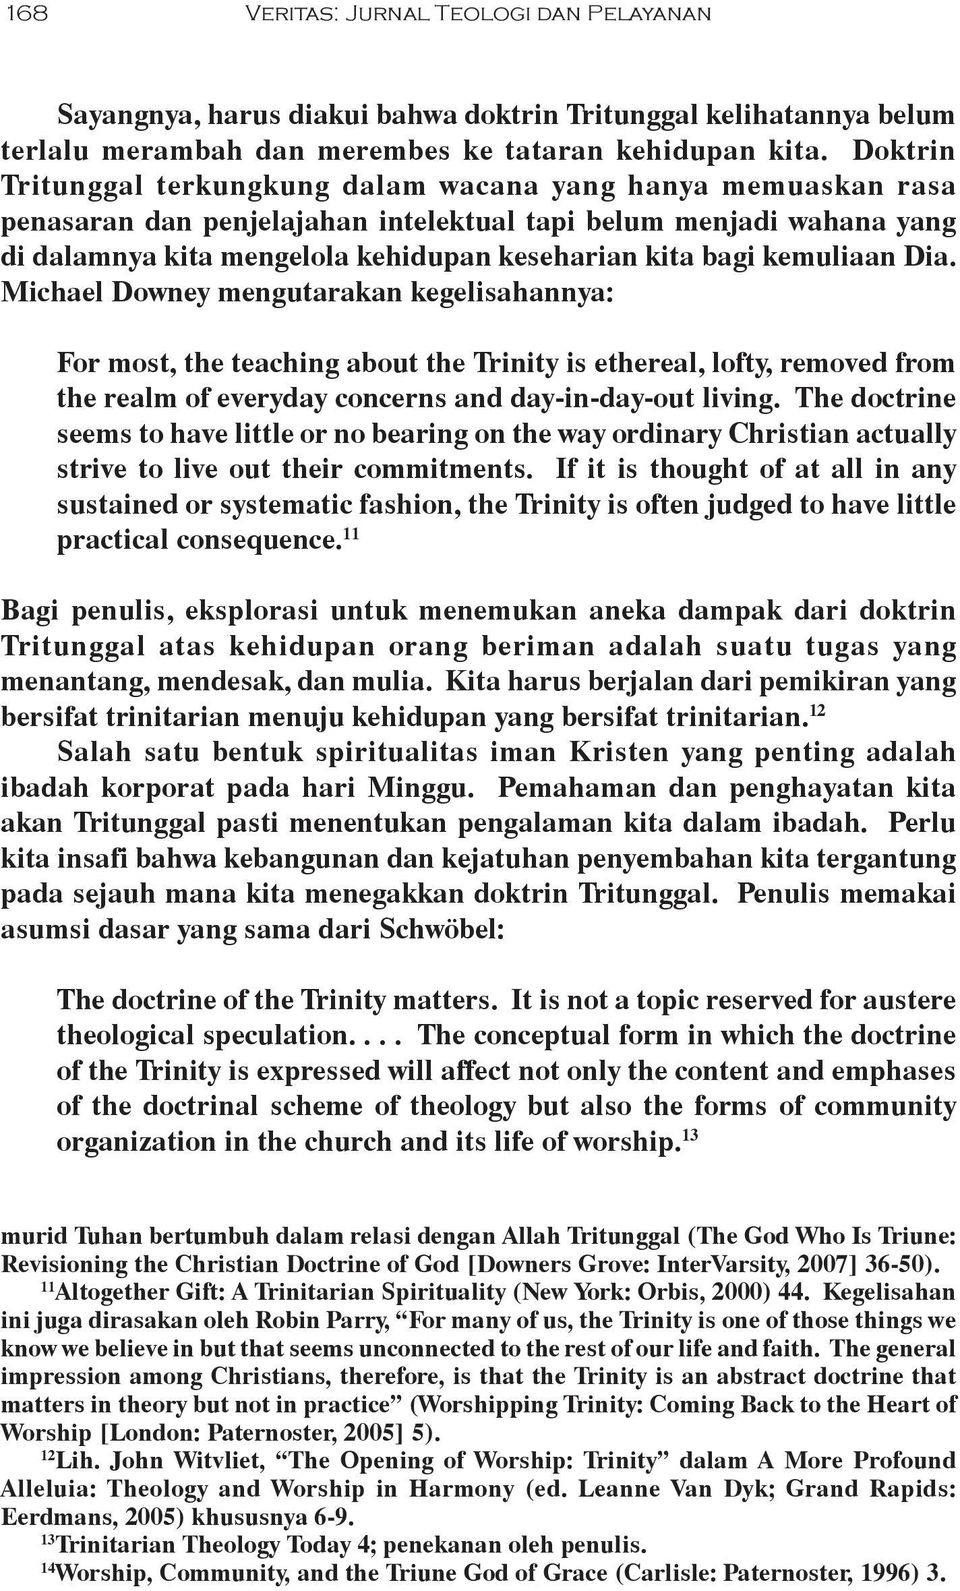 kemuliaan Dia. Michael Downey mengutarakan kegelisahannya: For most, the teaching about the Trinity is ethereal, lofty, removed from the realm of everyday concerns and day-in-day-out living.